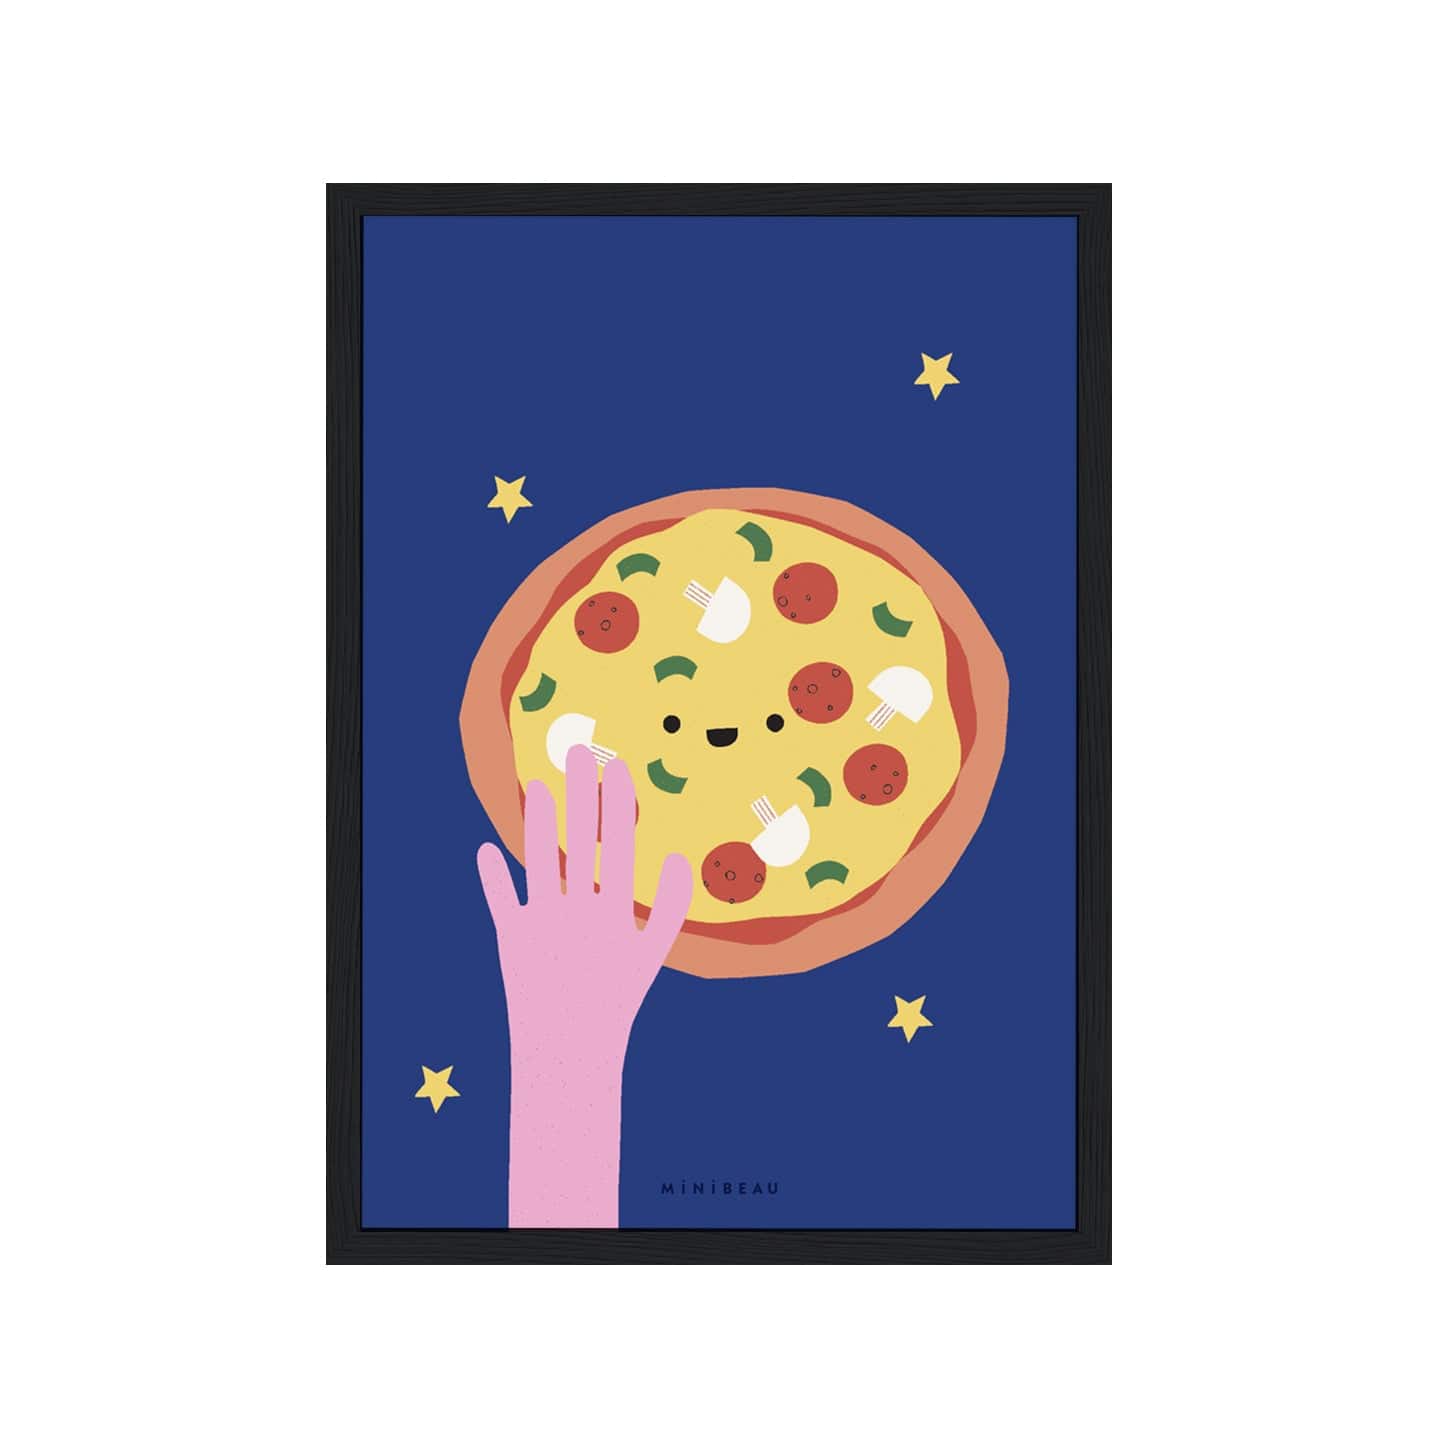 Art print in black frame. Our Happy Alphabet 'P' Art Print shows a smiling pizze with a hand reaching towards it, creating a P shape. Pizza has green pepper, pepperoni and mushrooms on it. All on a dark blue background with four small yellow stars.